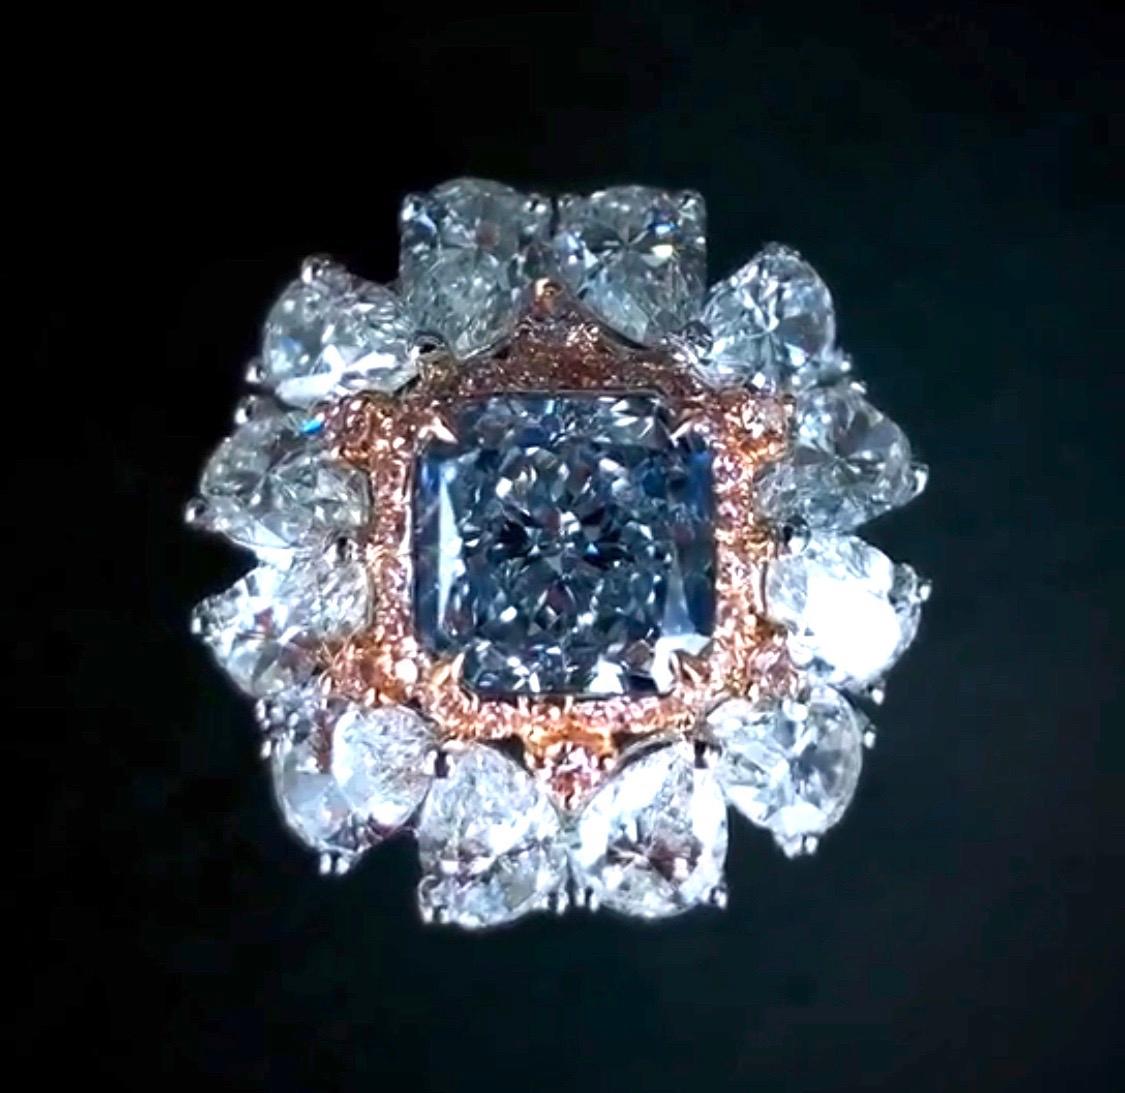 From the Emilio Jewelry Vault, Showcasing a stunning Gia certified 2.00 fancy light gray blue diamond in the center. The mounting was custom made around the center stone. After setting with a very special rhodium technique, the center faces up as a